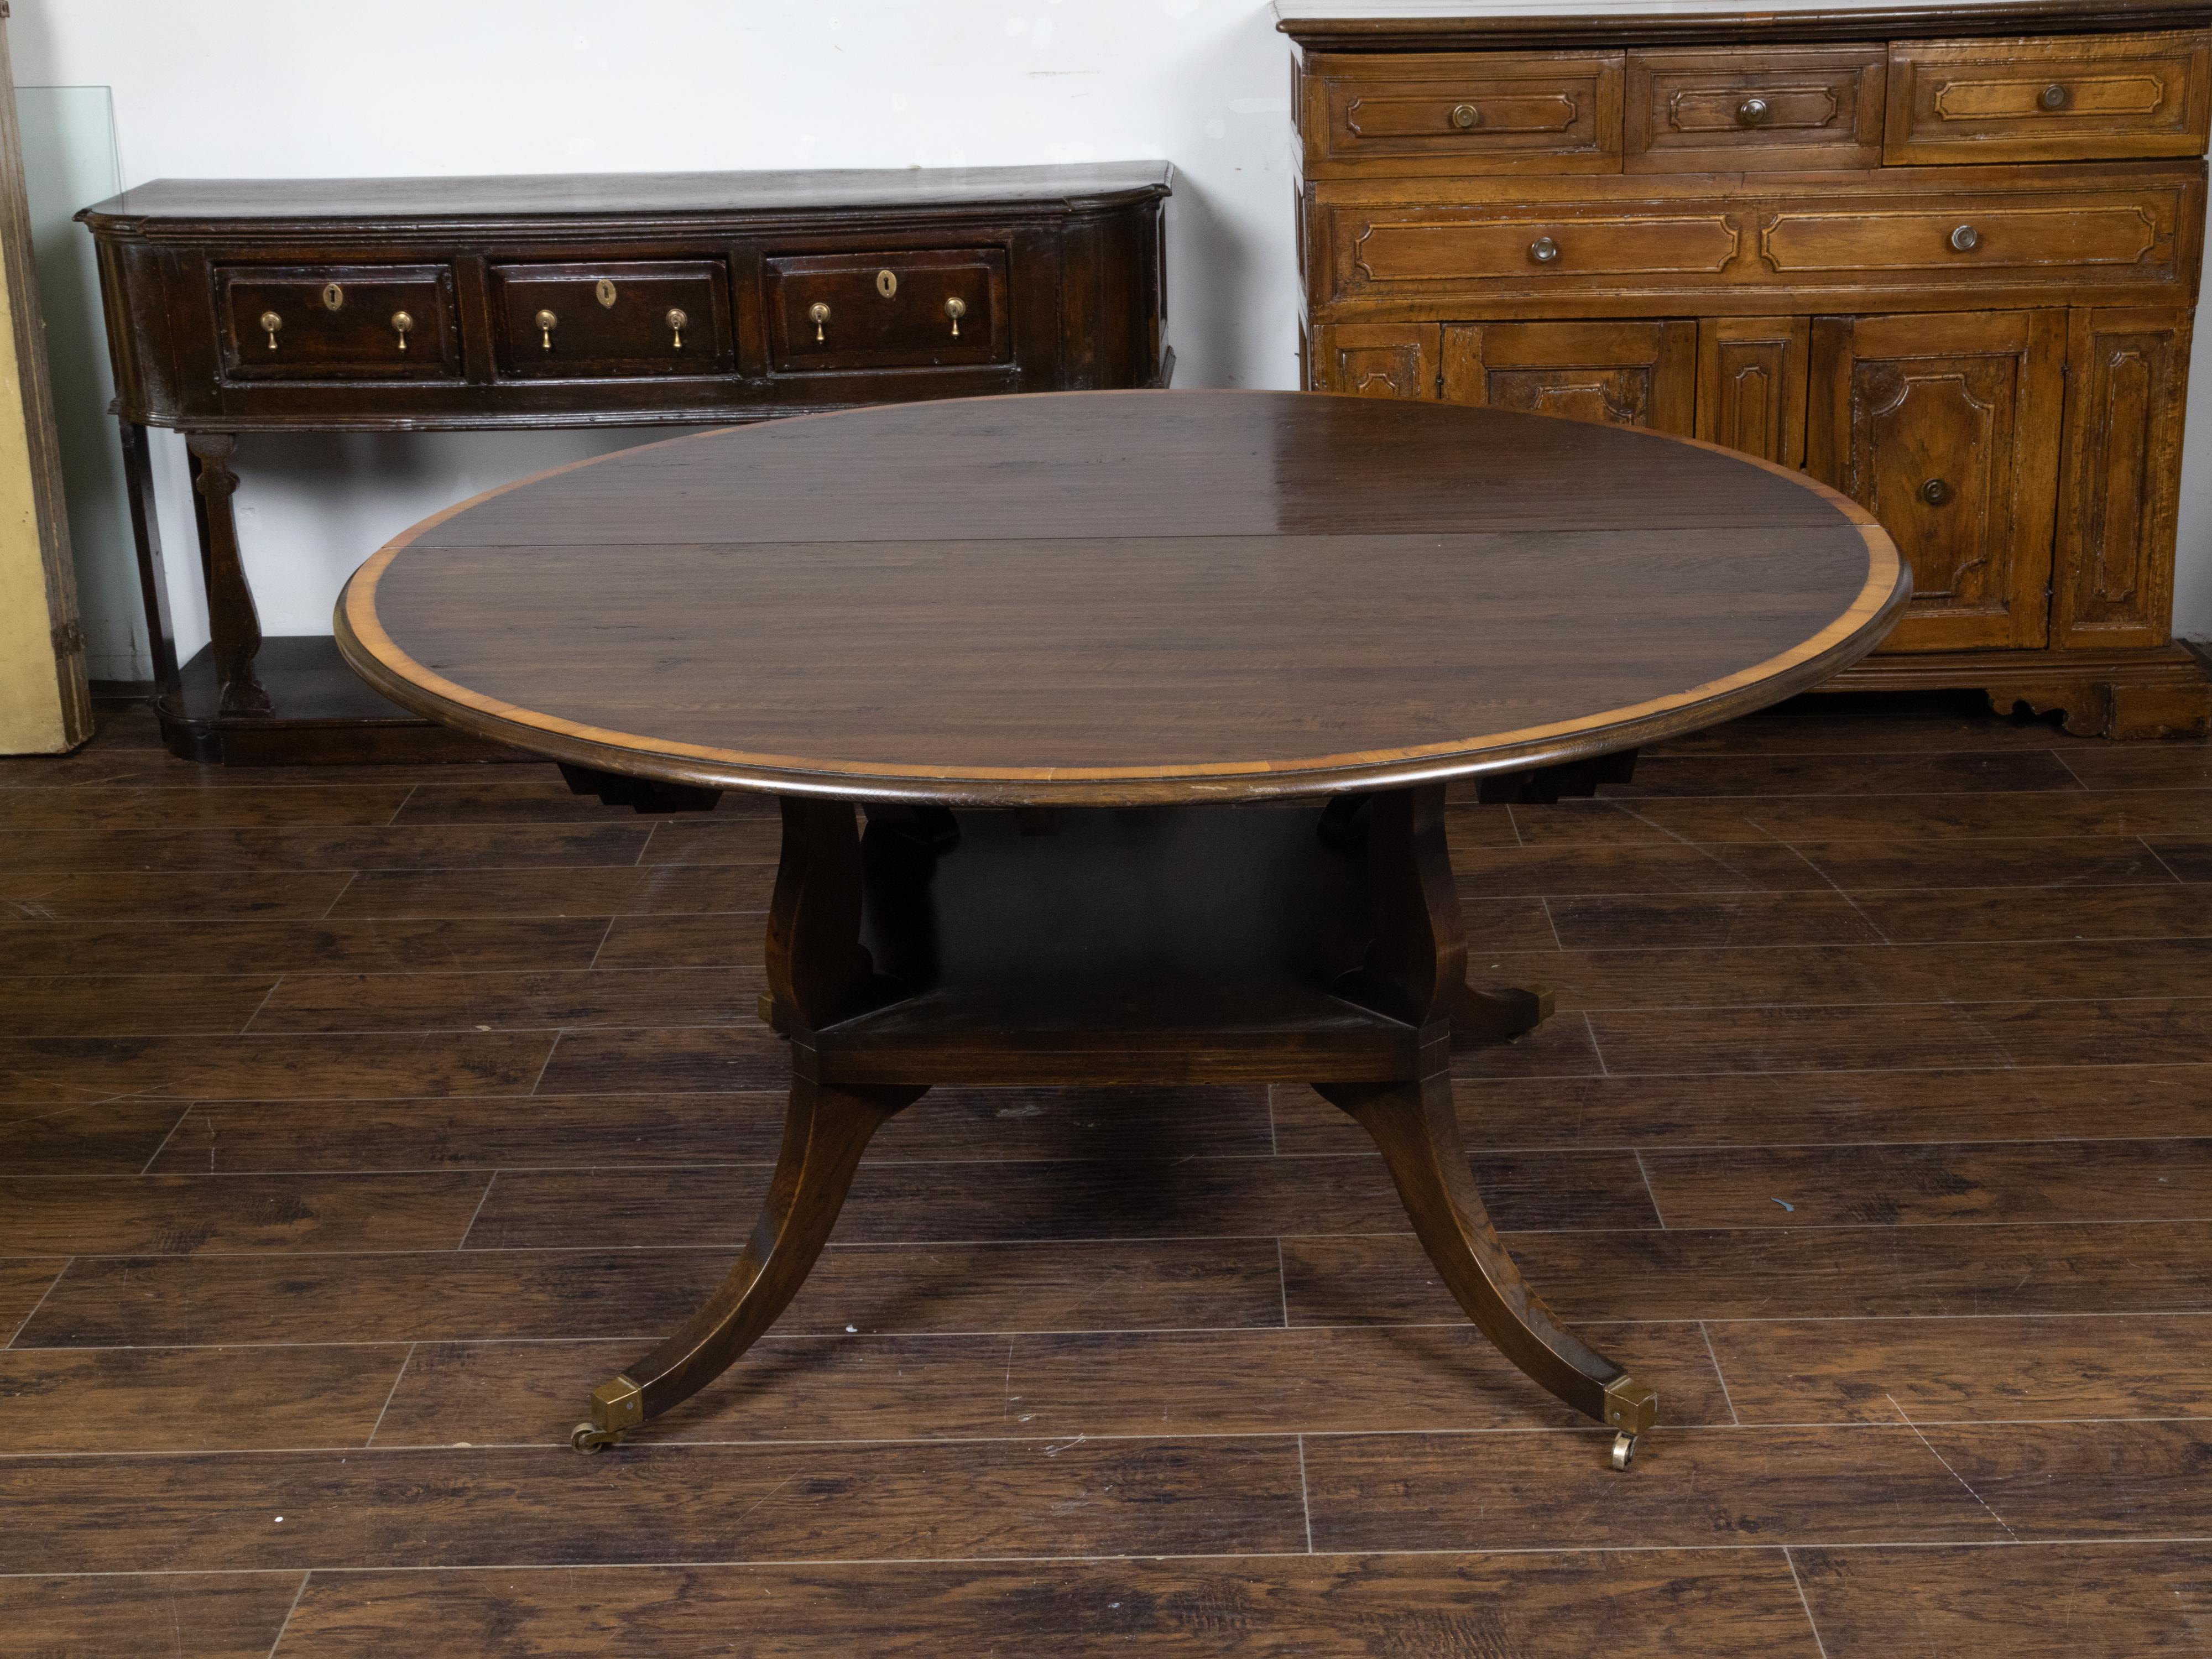 An English vintage oak dining or conference table from the Mid-20th Century with circular top, banding, two leaves extending it to an oval table, four legs and brass casters. Created in England during the midcentury period, this versatile table